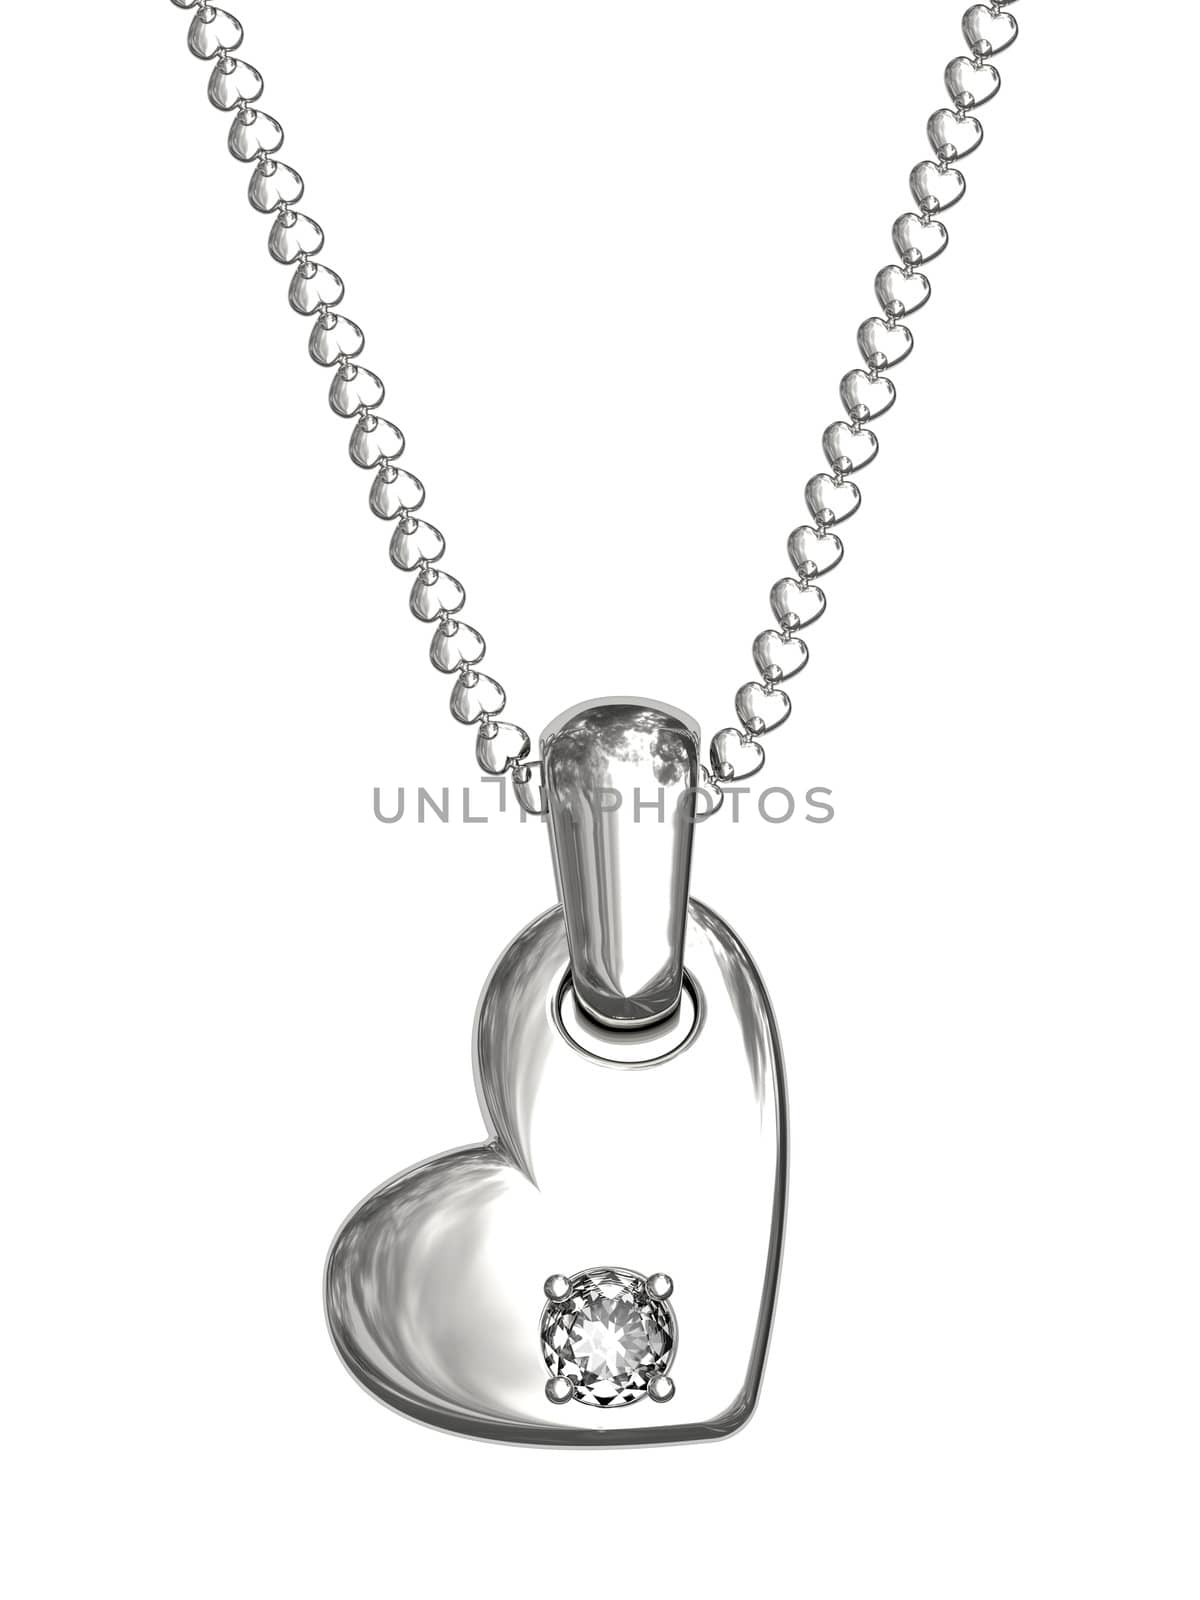 Platinum or silver pendant in shape of heart with diamond on chain isolated on white. High resolution 3D image